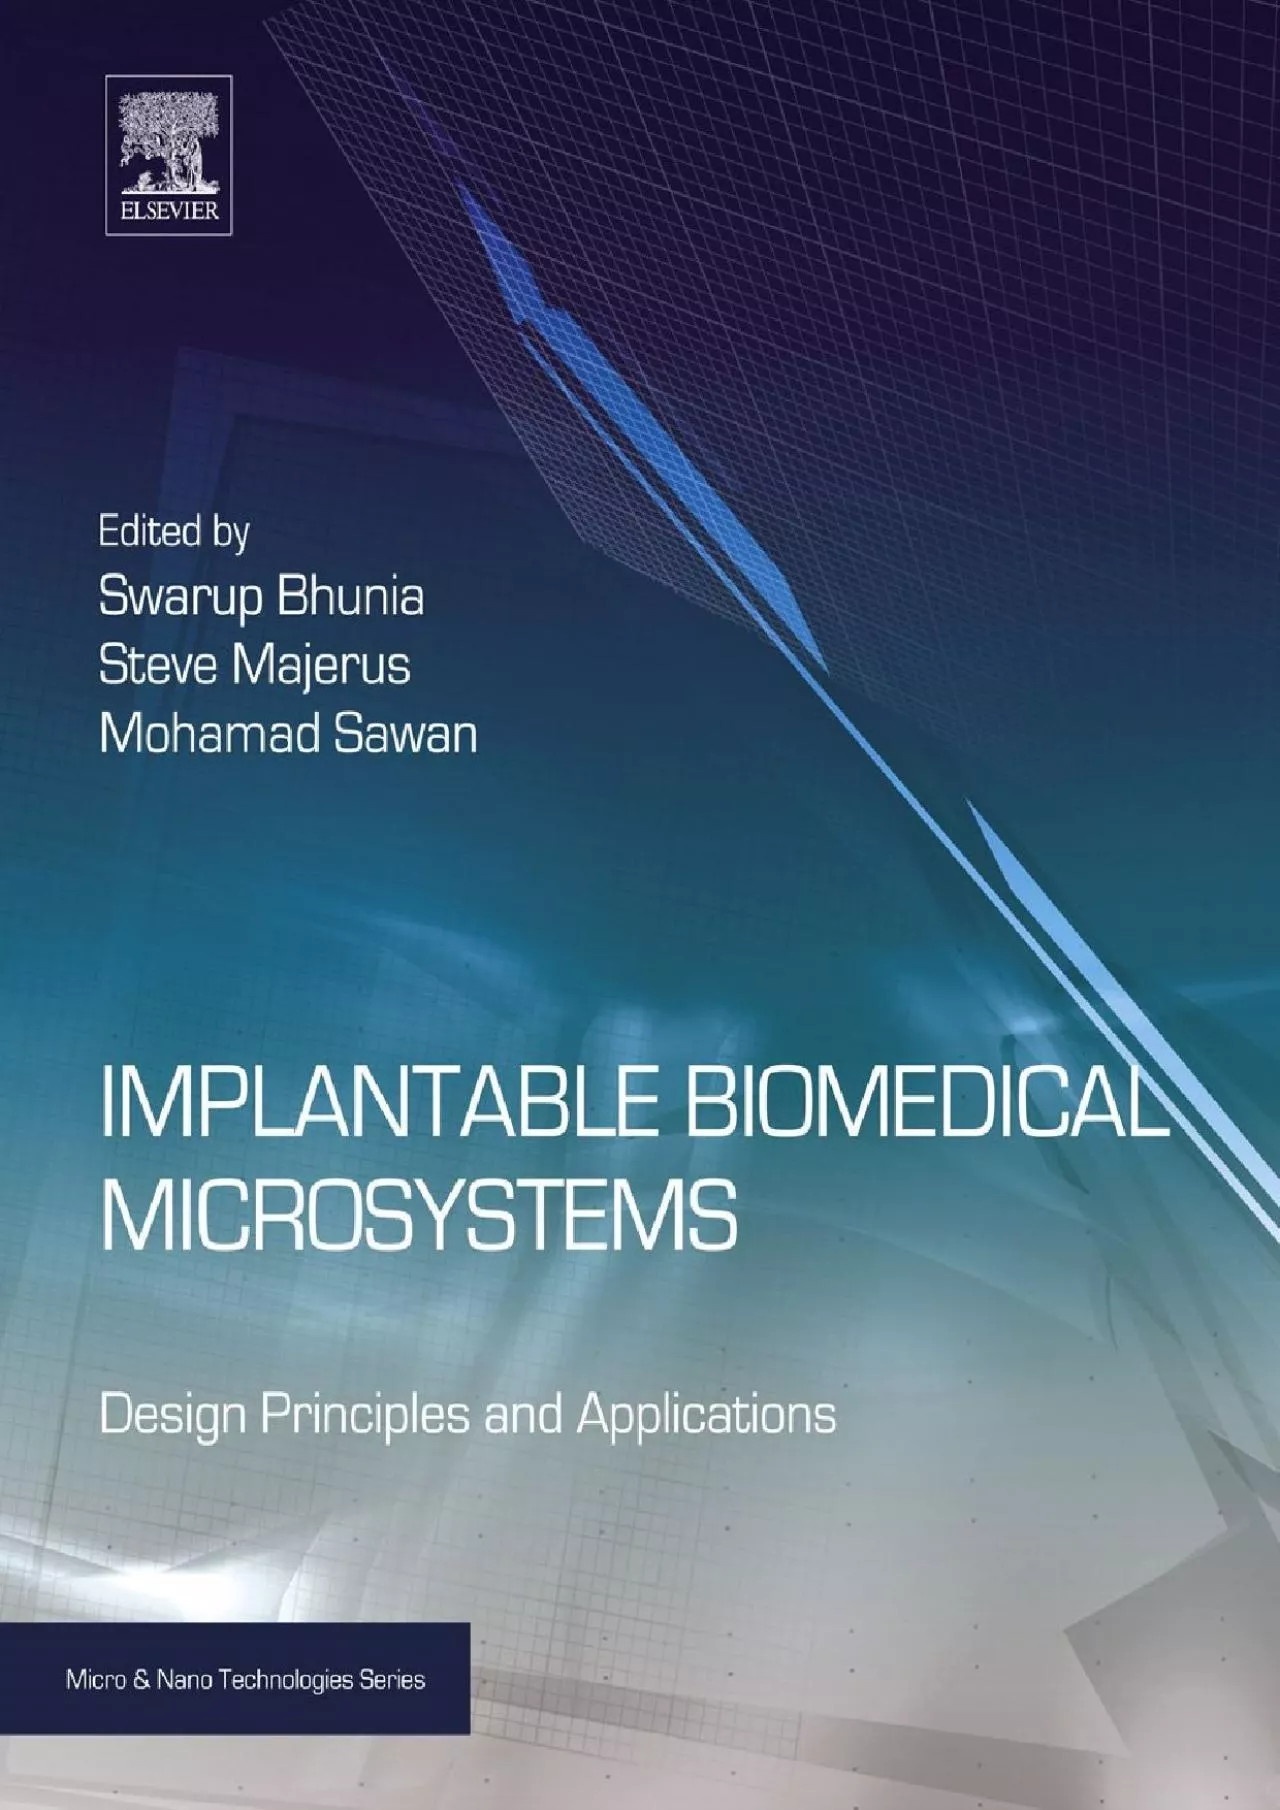 (EBOOK)-Implantable Biomedical Microsystems: Design Principles and Applications (Micro